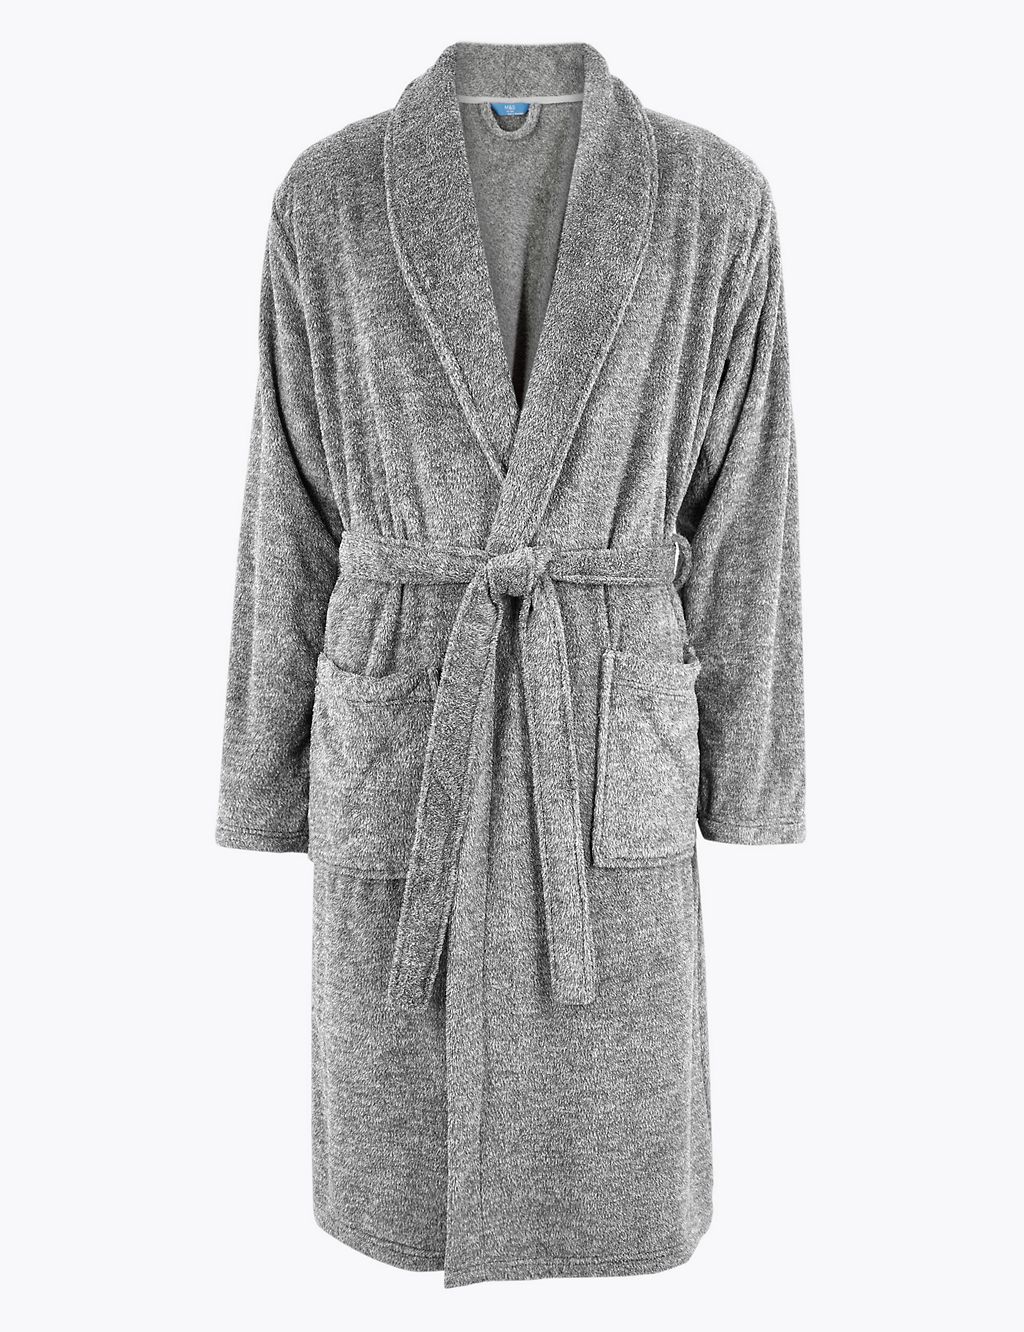 Supersoft Fleece Marl Gown 1 of 4